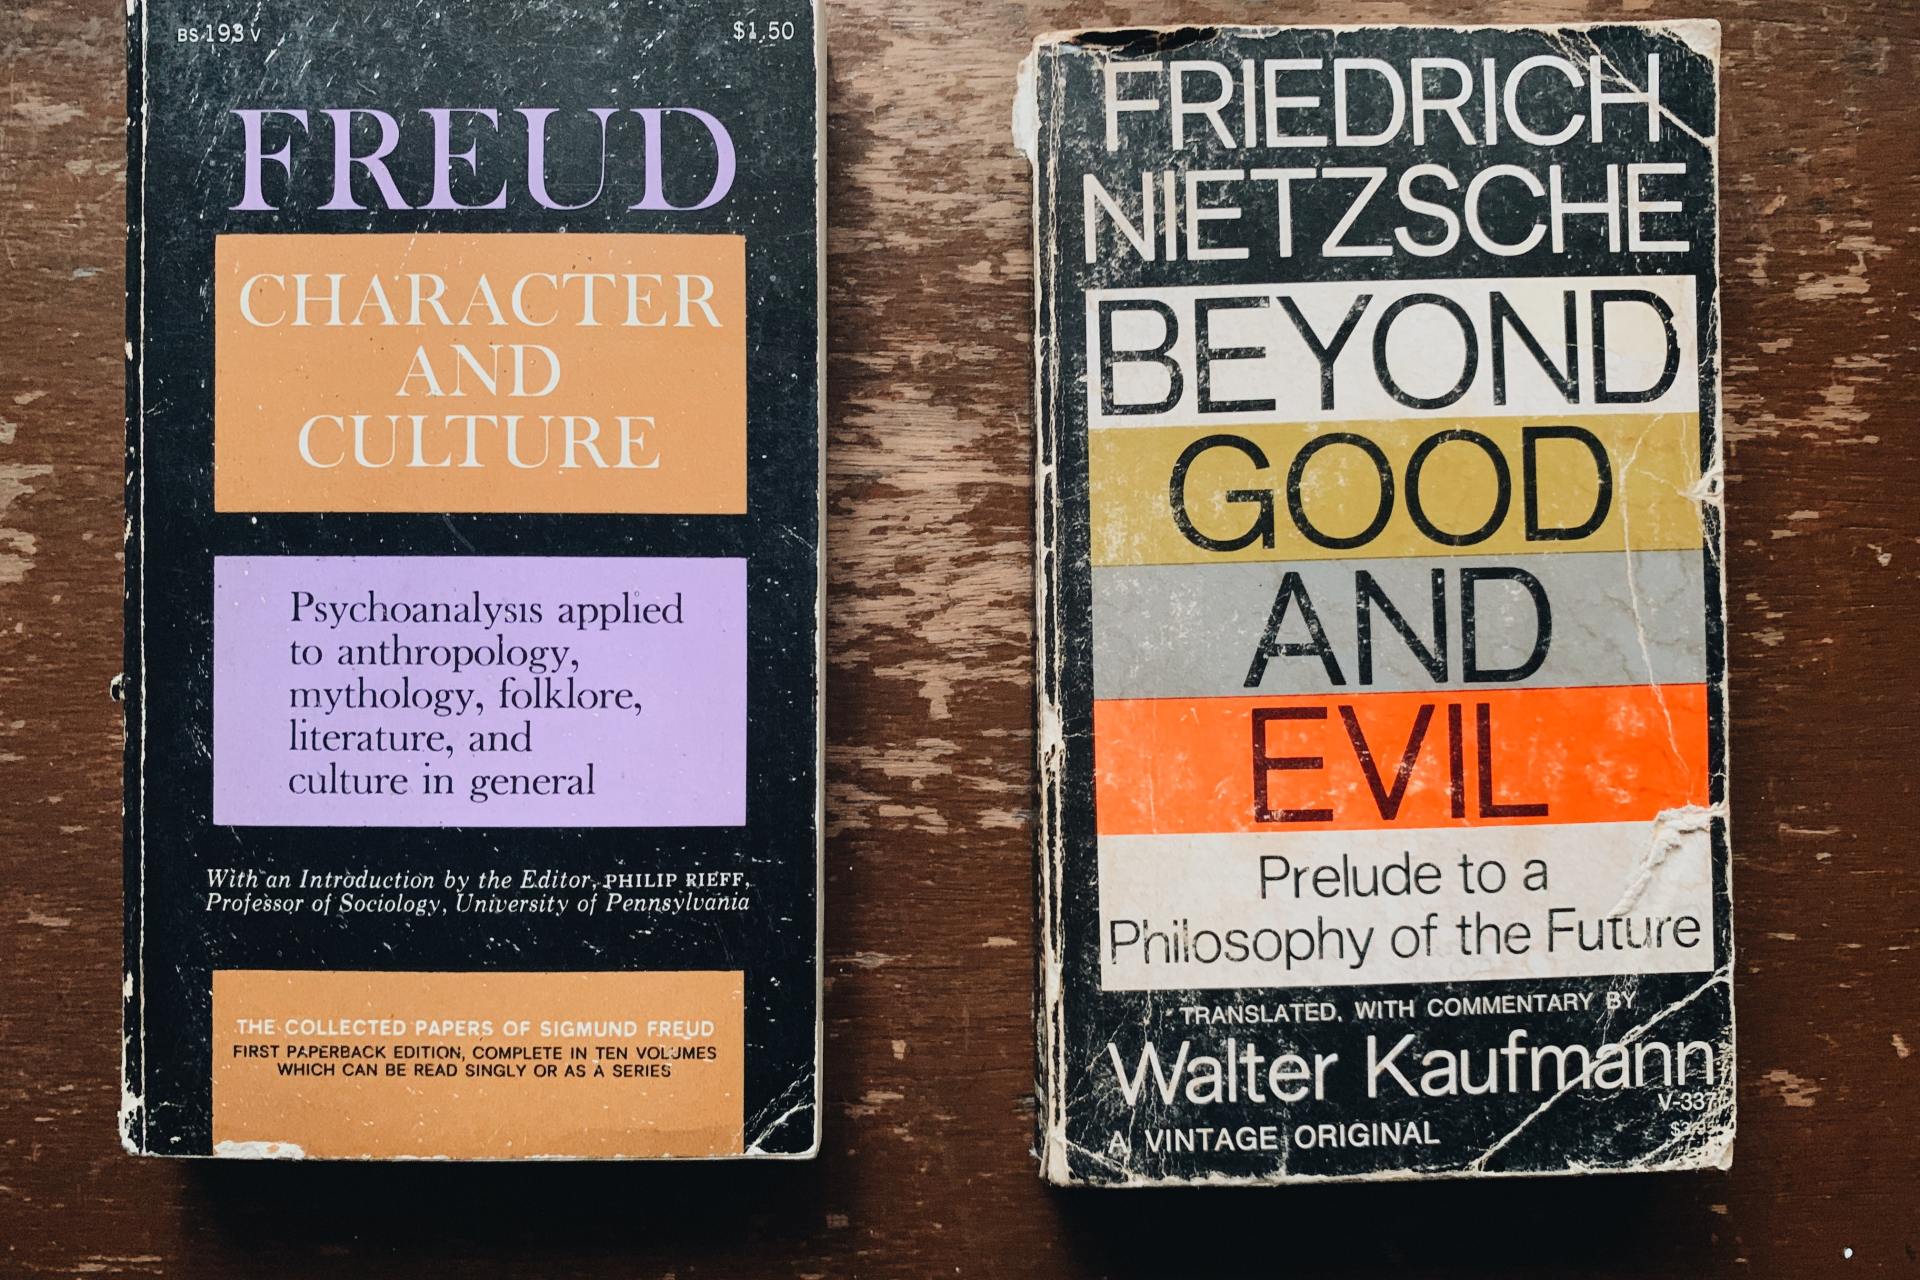 Two novel books on wooden surface